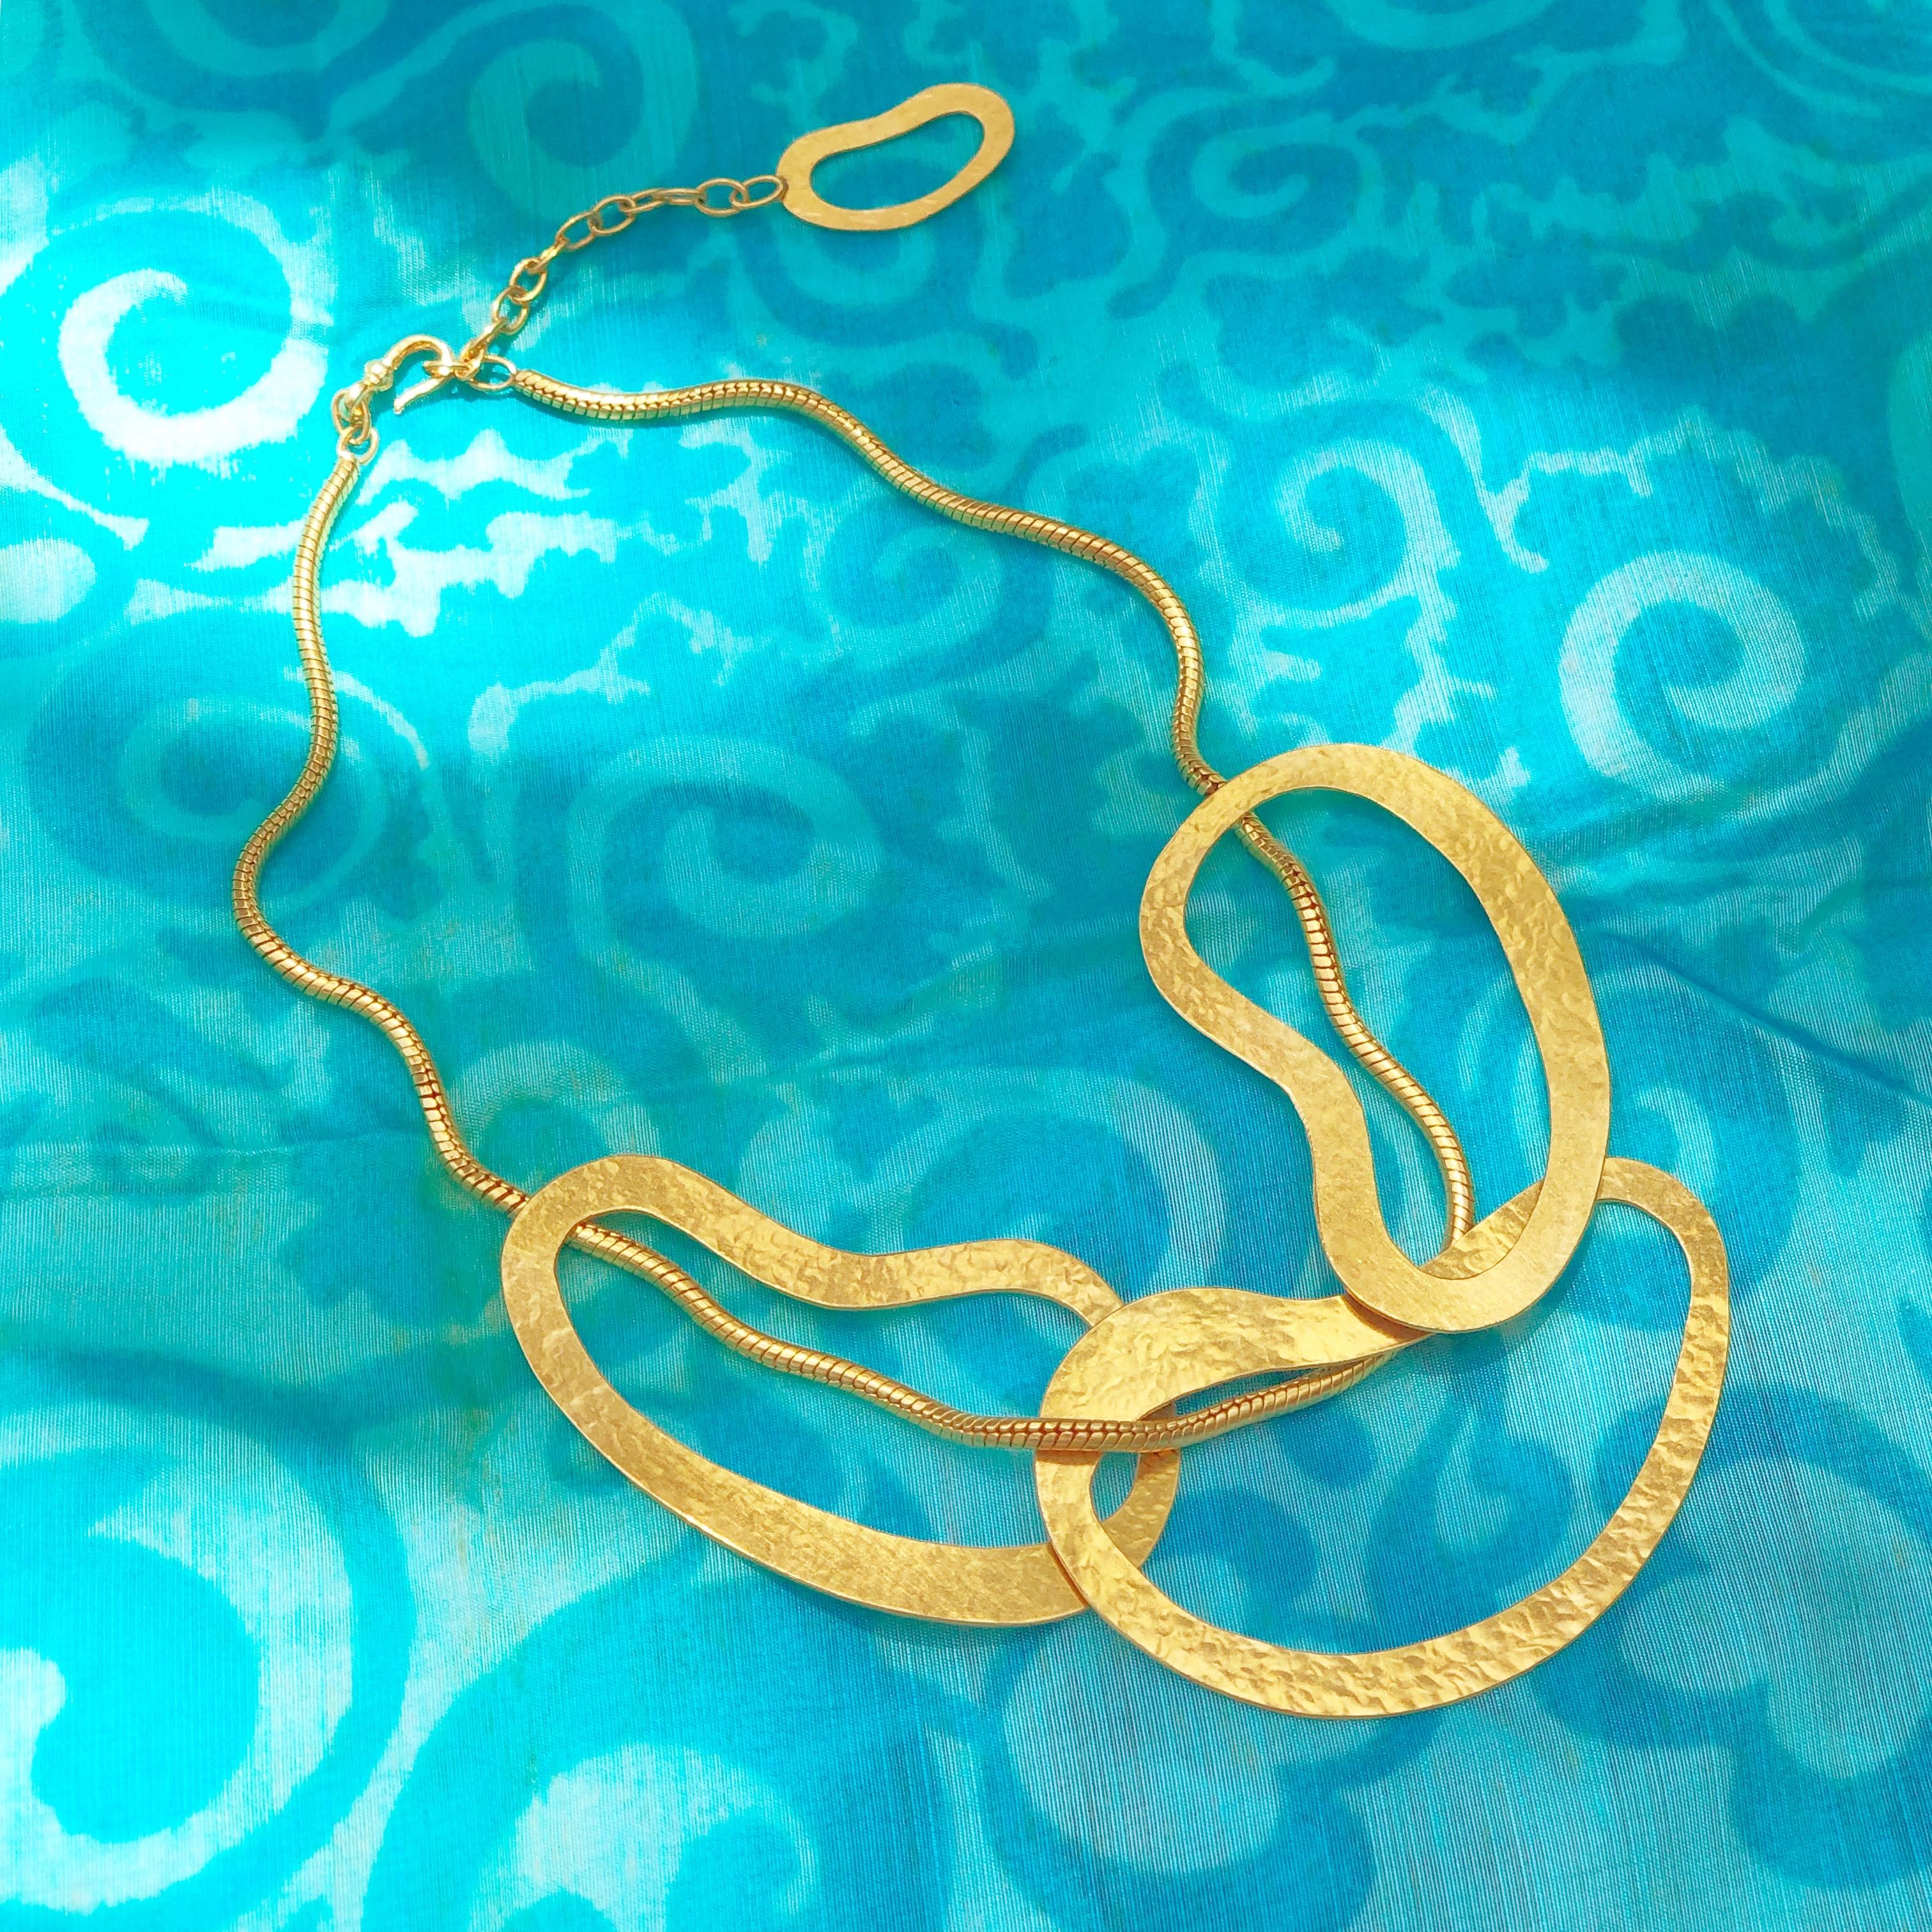 Exquisite gilt abstract contemporary statement necklace by designer Herve van der Straeten. Hammered gold-plated brass rings intertwine with a sleek serpentine rope chain in this unique work of wearable architectural art!  A wonderful addition to